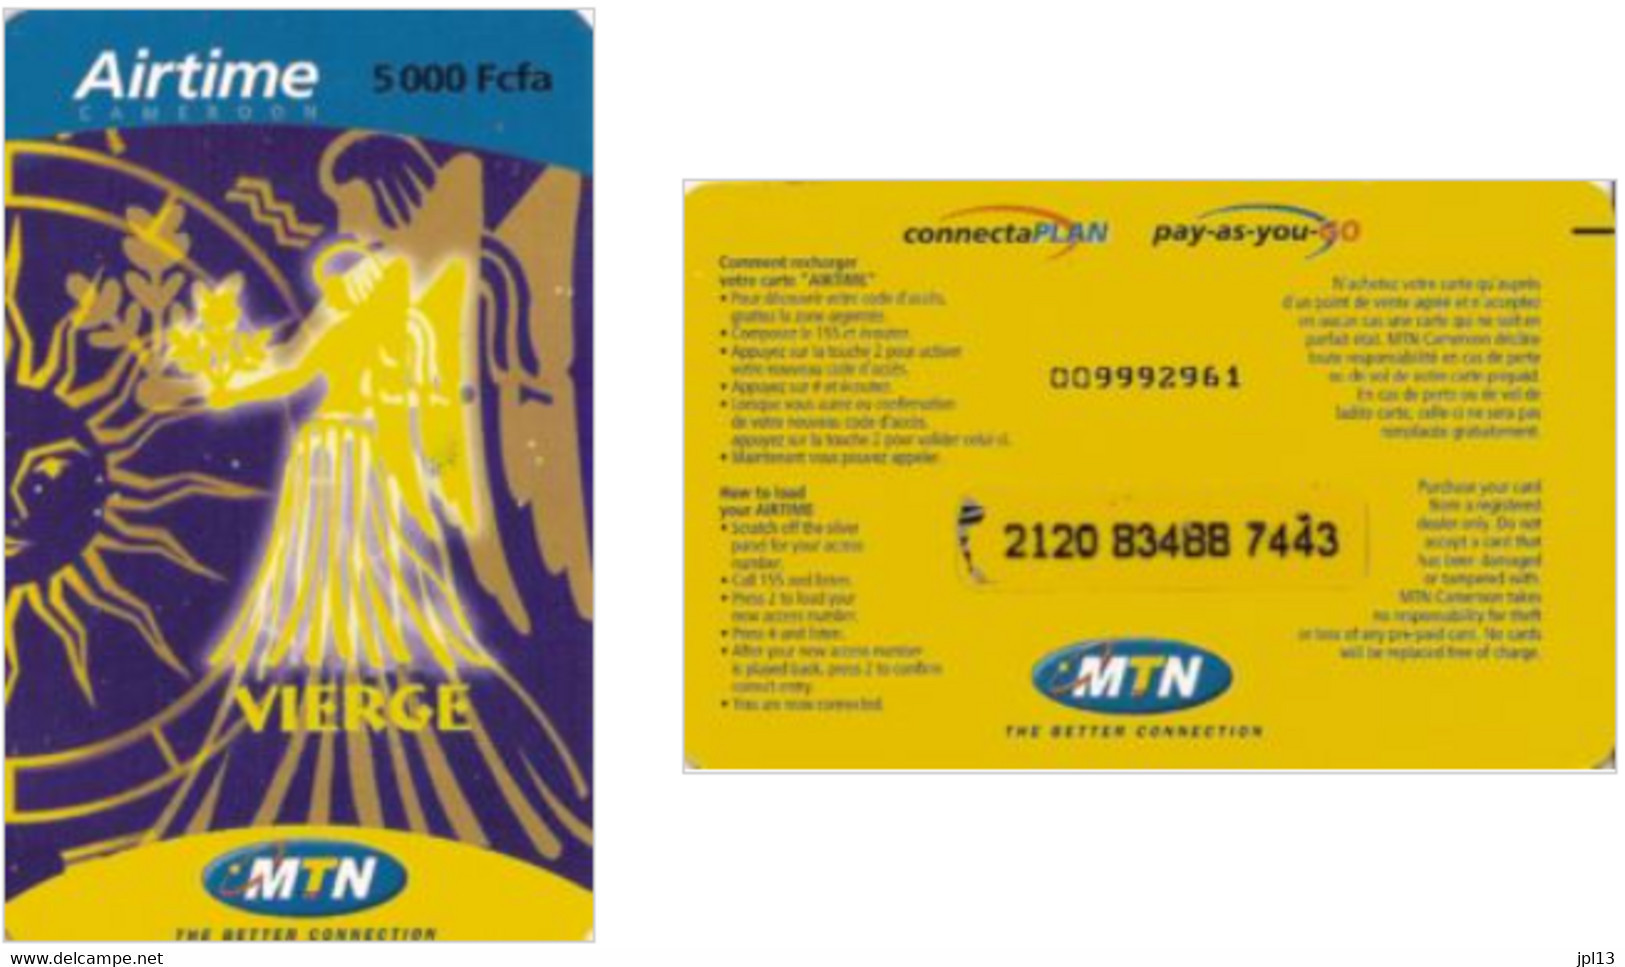 Recharge GSM Cameroun MTN - Airtime - Zodiac Vierge - Cameroon